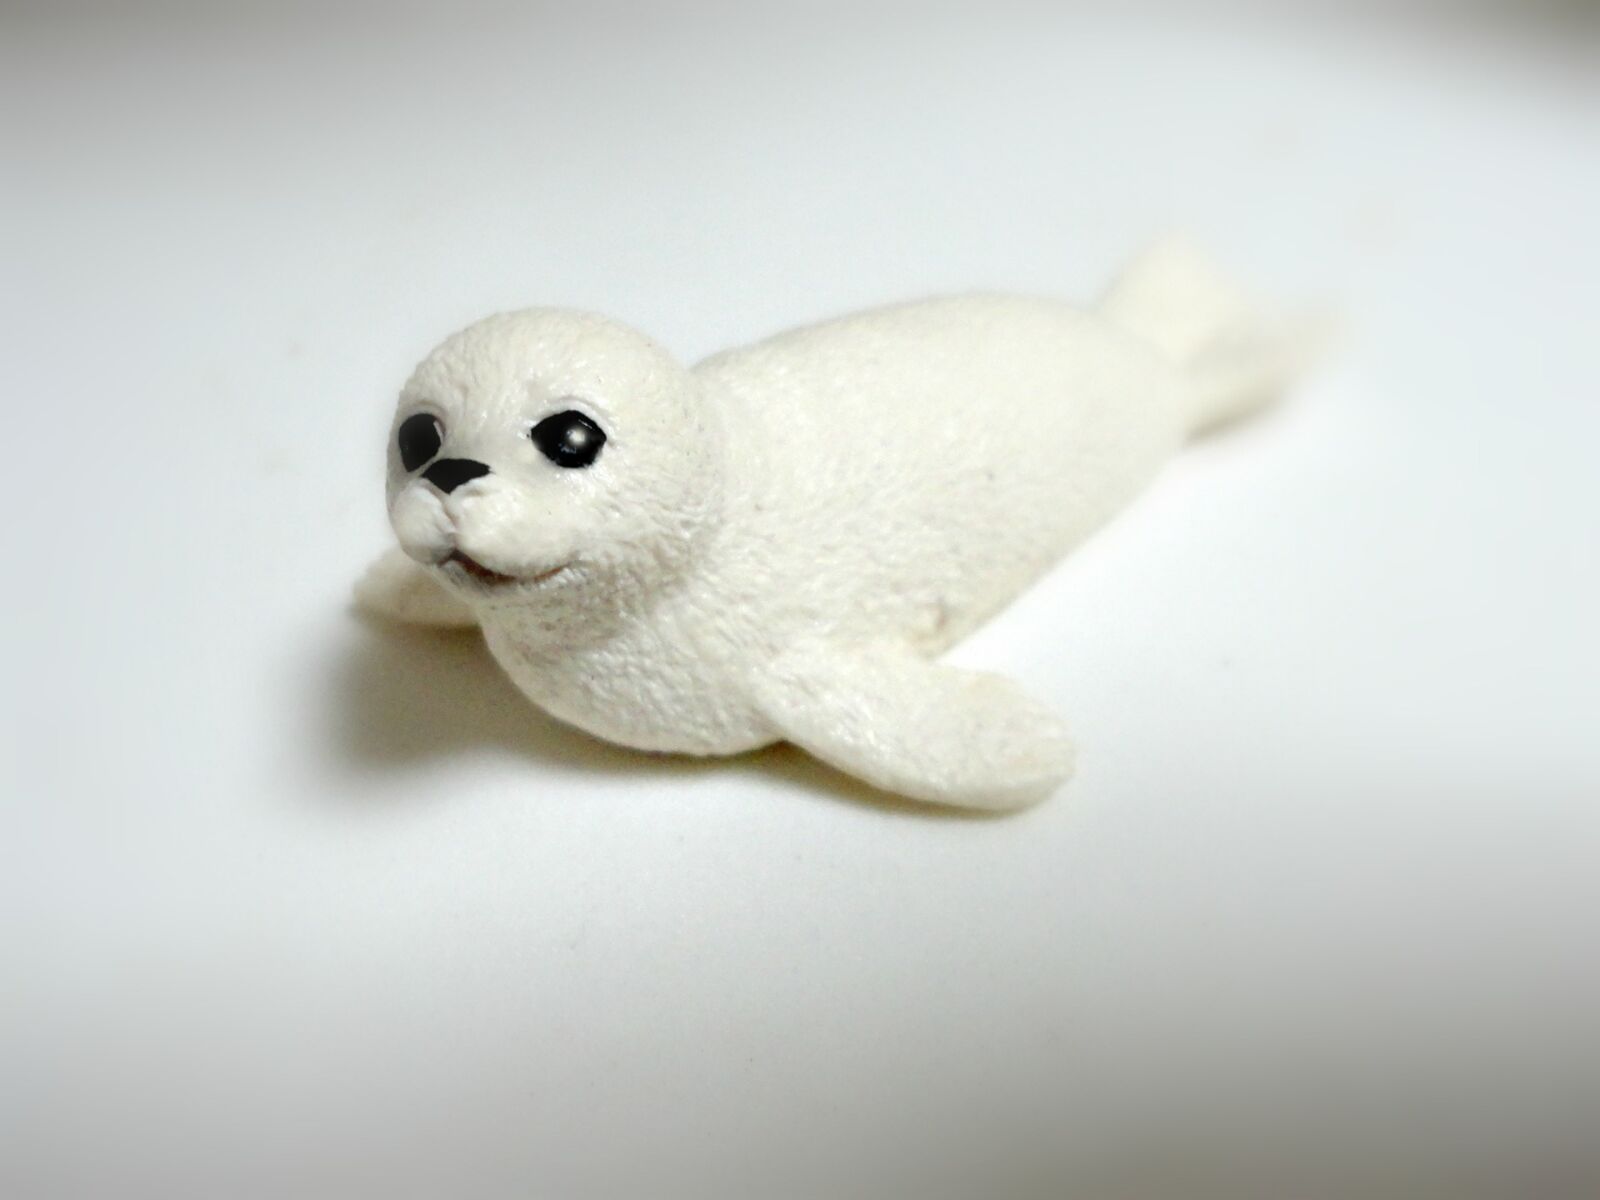 Sony DSC-W350 sample photo. "Seal, cub, white seal" photography